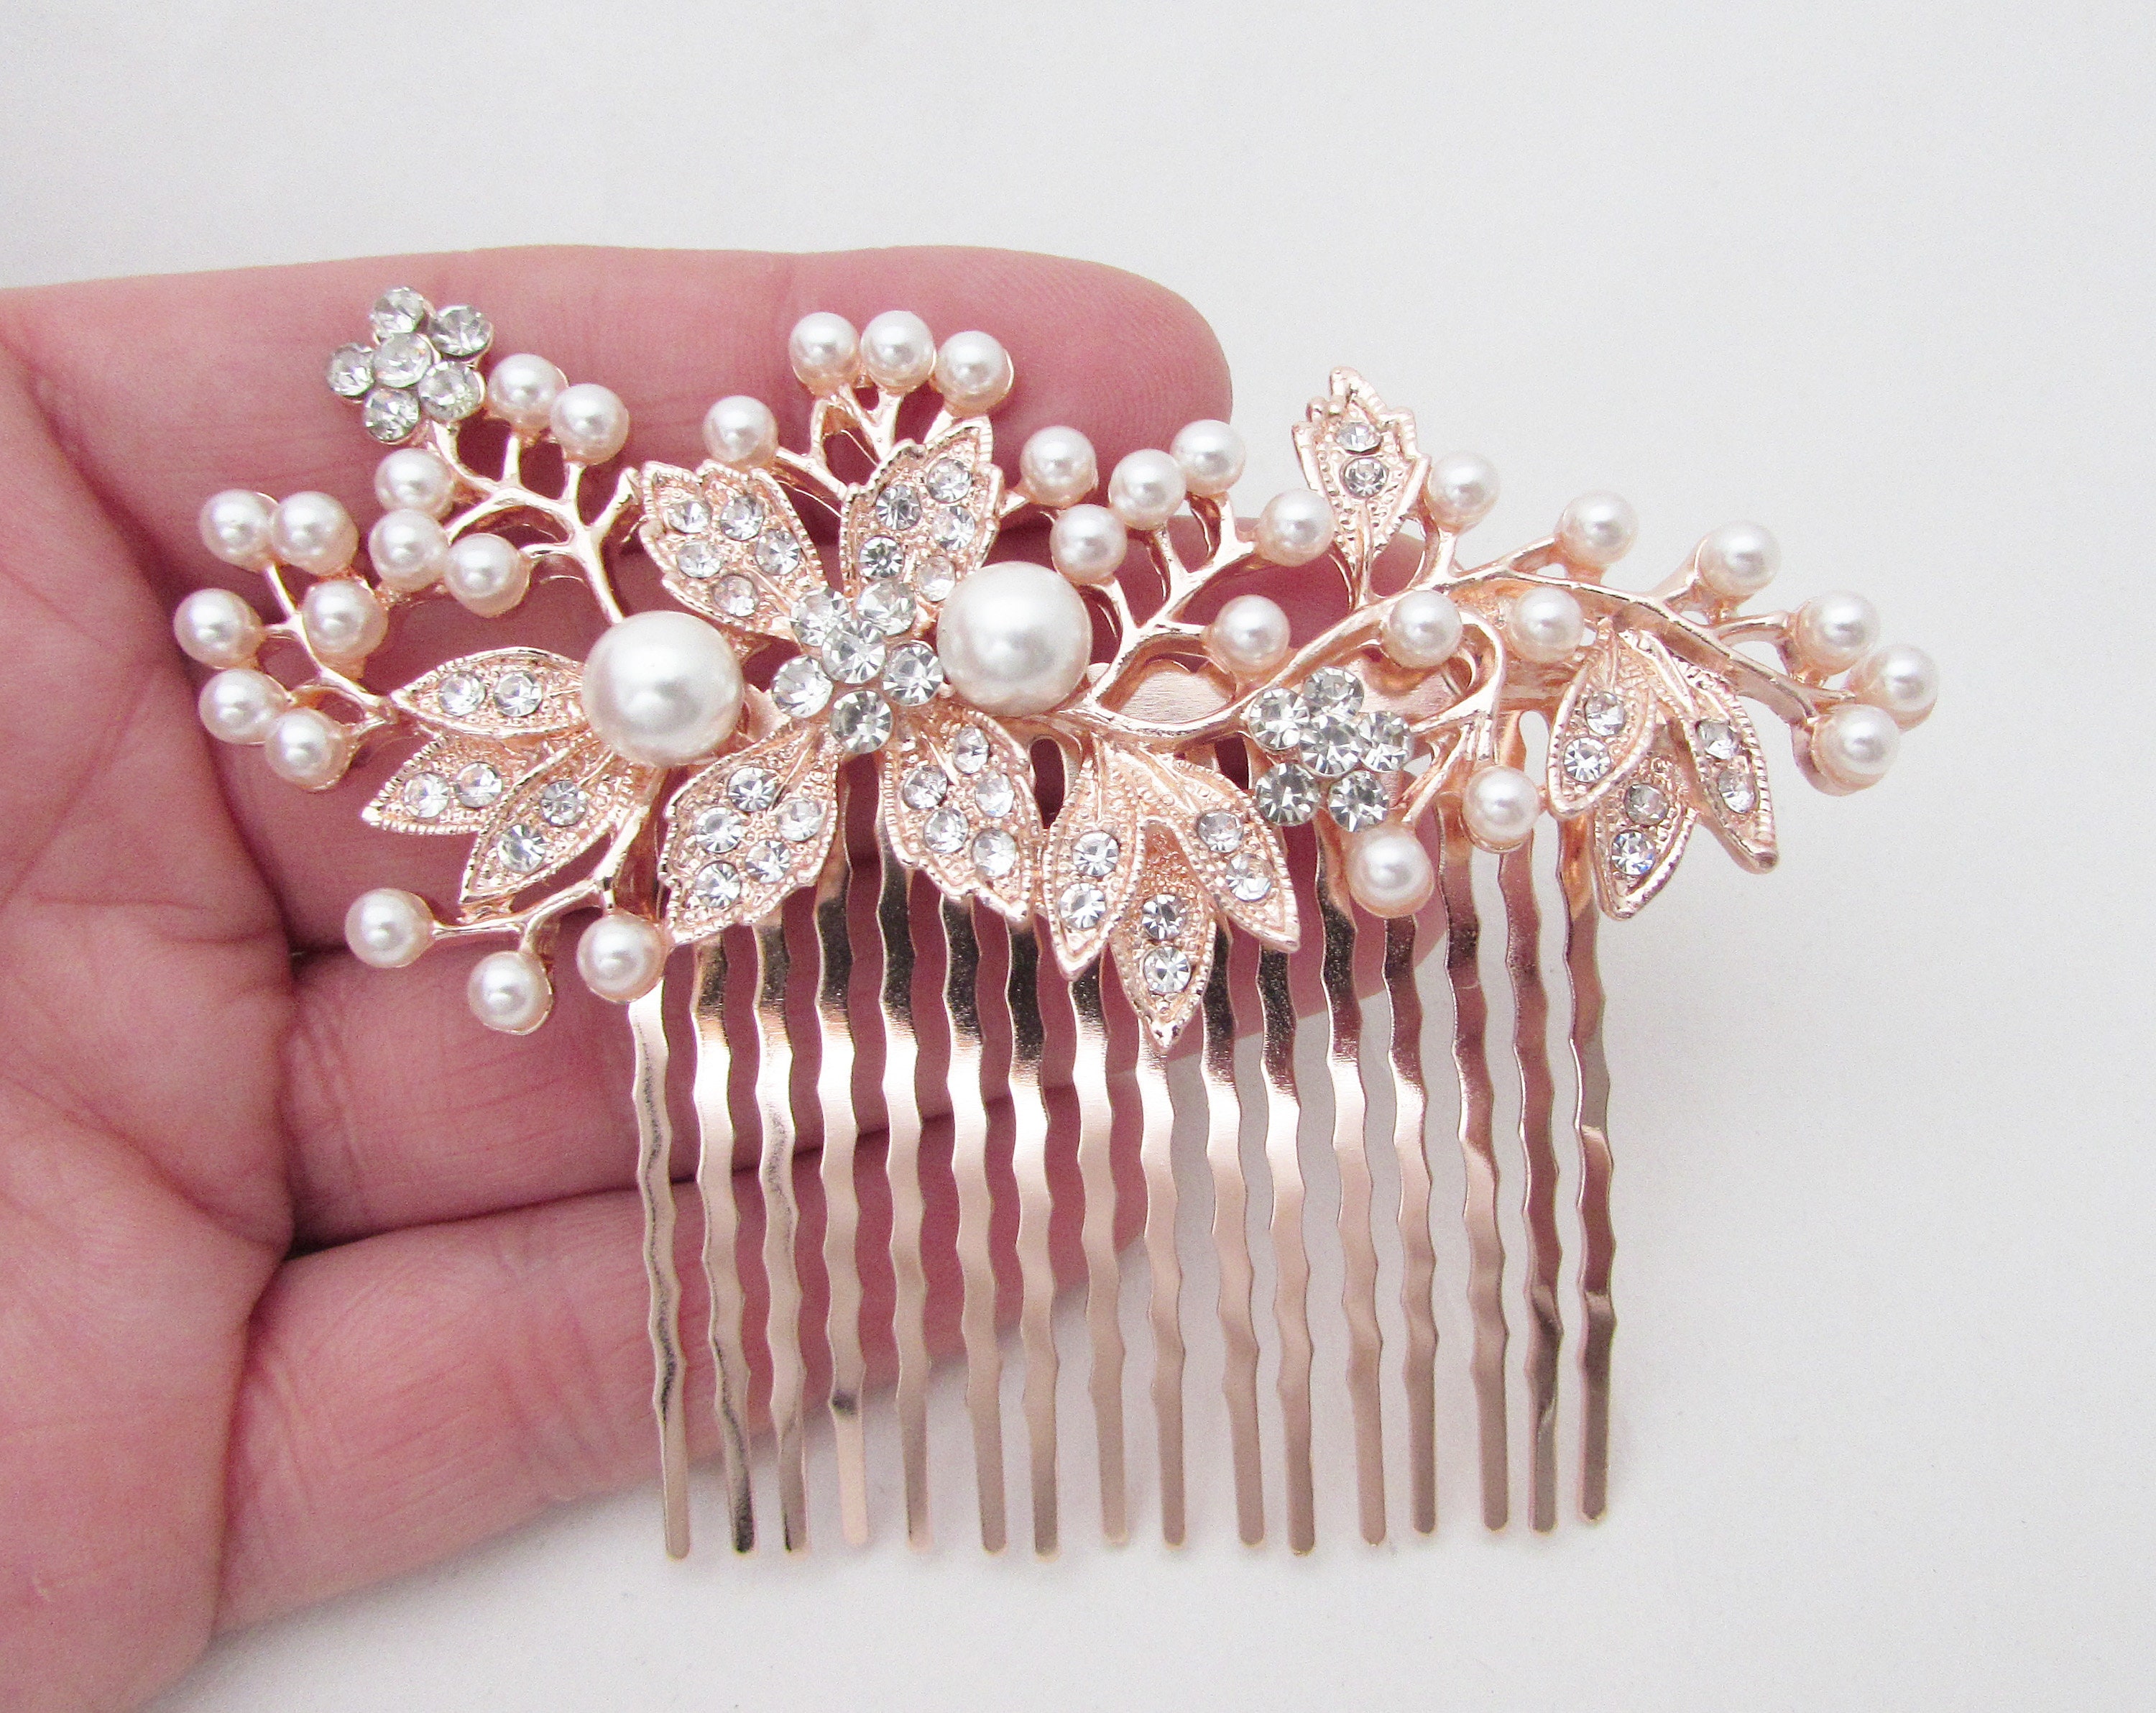 Could This Glamorous Hair Accessory Be Making A Comeback: Why Vintage Gold Hair Combs Are Trending In 2023